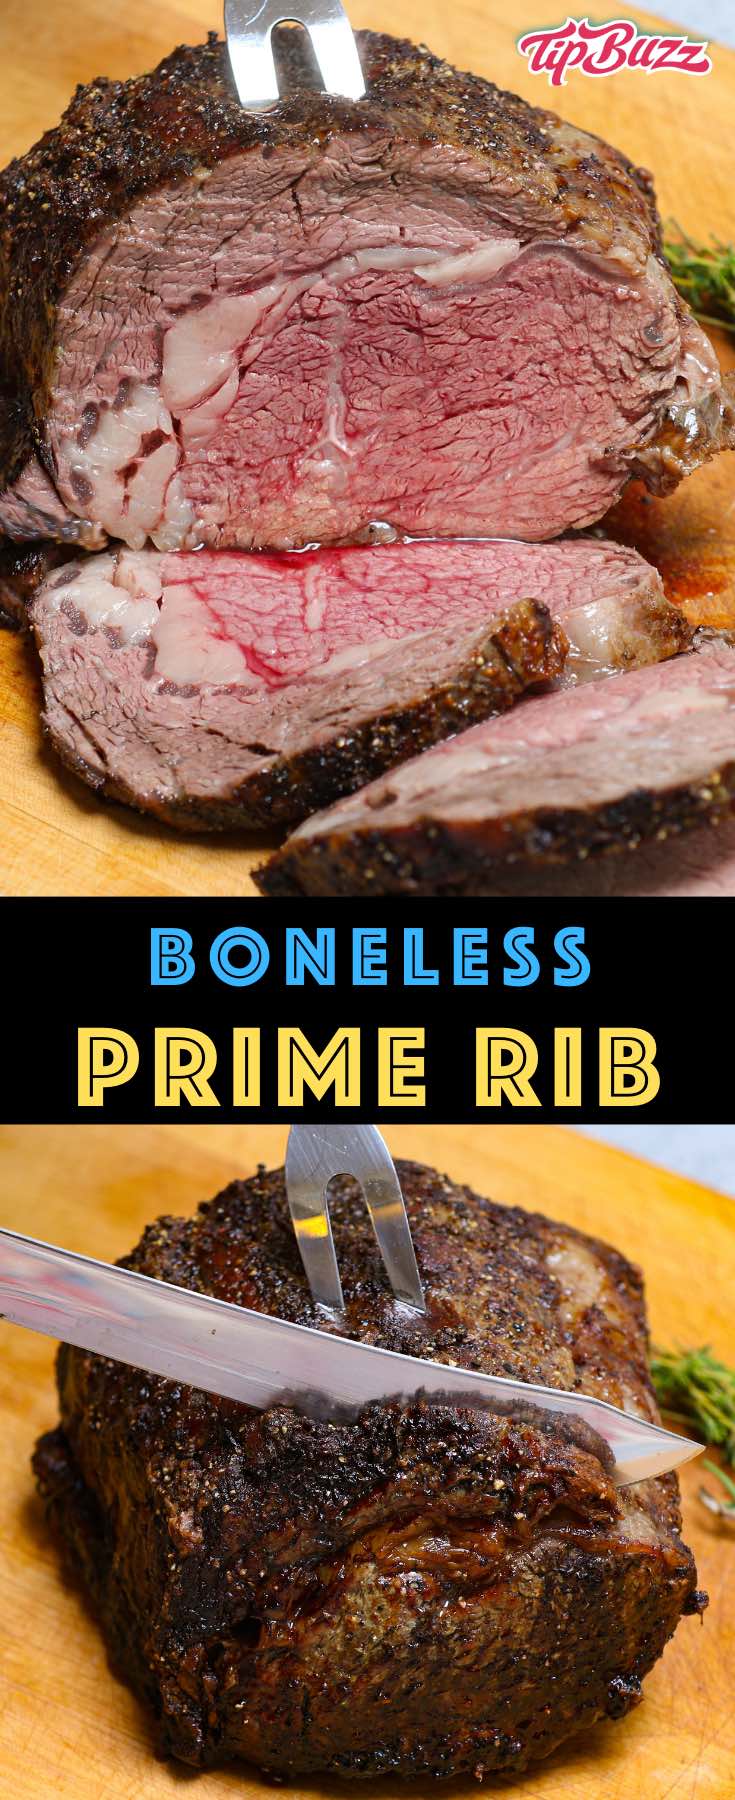 This Boneless Prime Rib is roasted to perfection in the oven for tender and juicy meat that melts in your mouth! This boneless rib roast is an easy main course for holiday entertaining or any celebration! #primerib #bonelessribroast